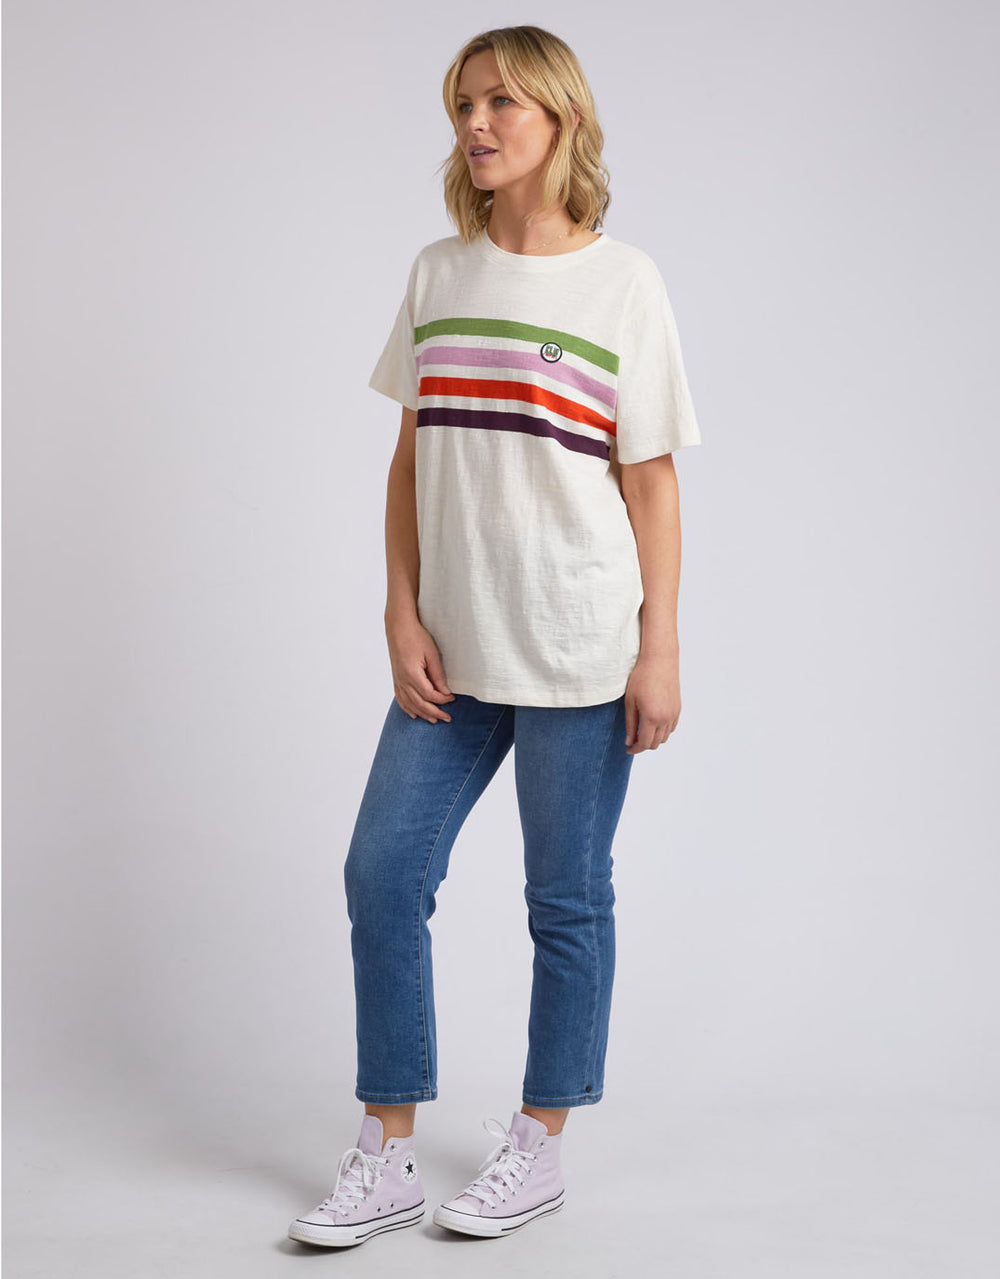 elm-lined-up-tee-pearl-omens-clothing